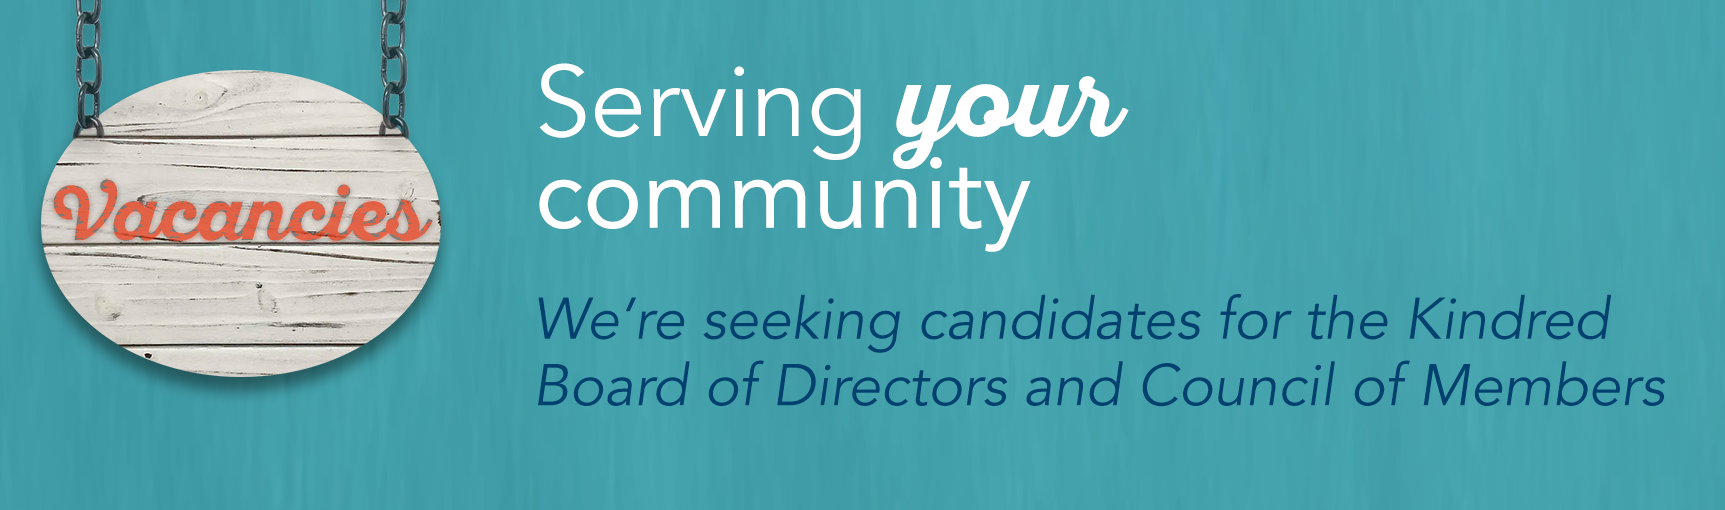 Serving your community. We're seeking candidates for the Kindred Board of Directors and Council of Members.